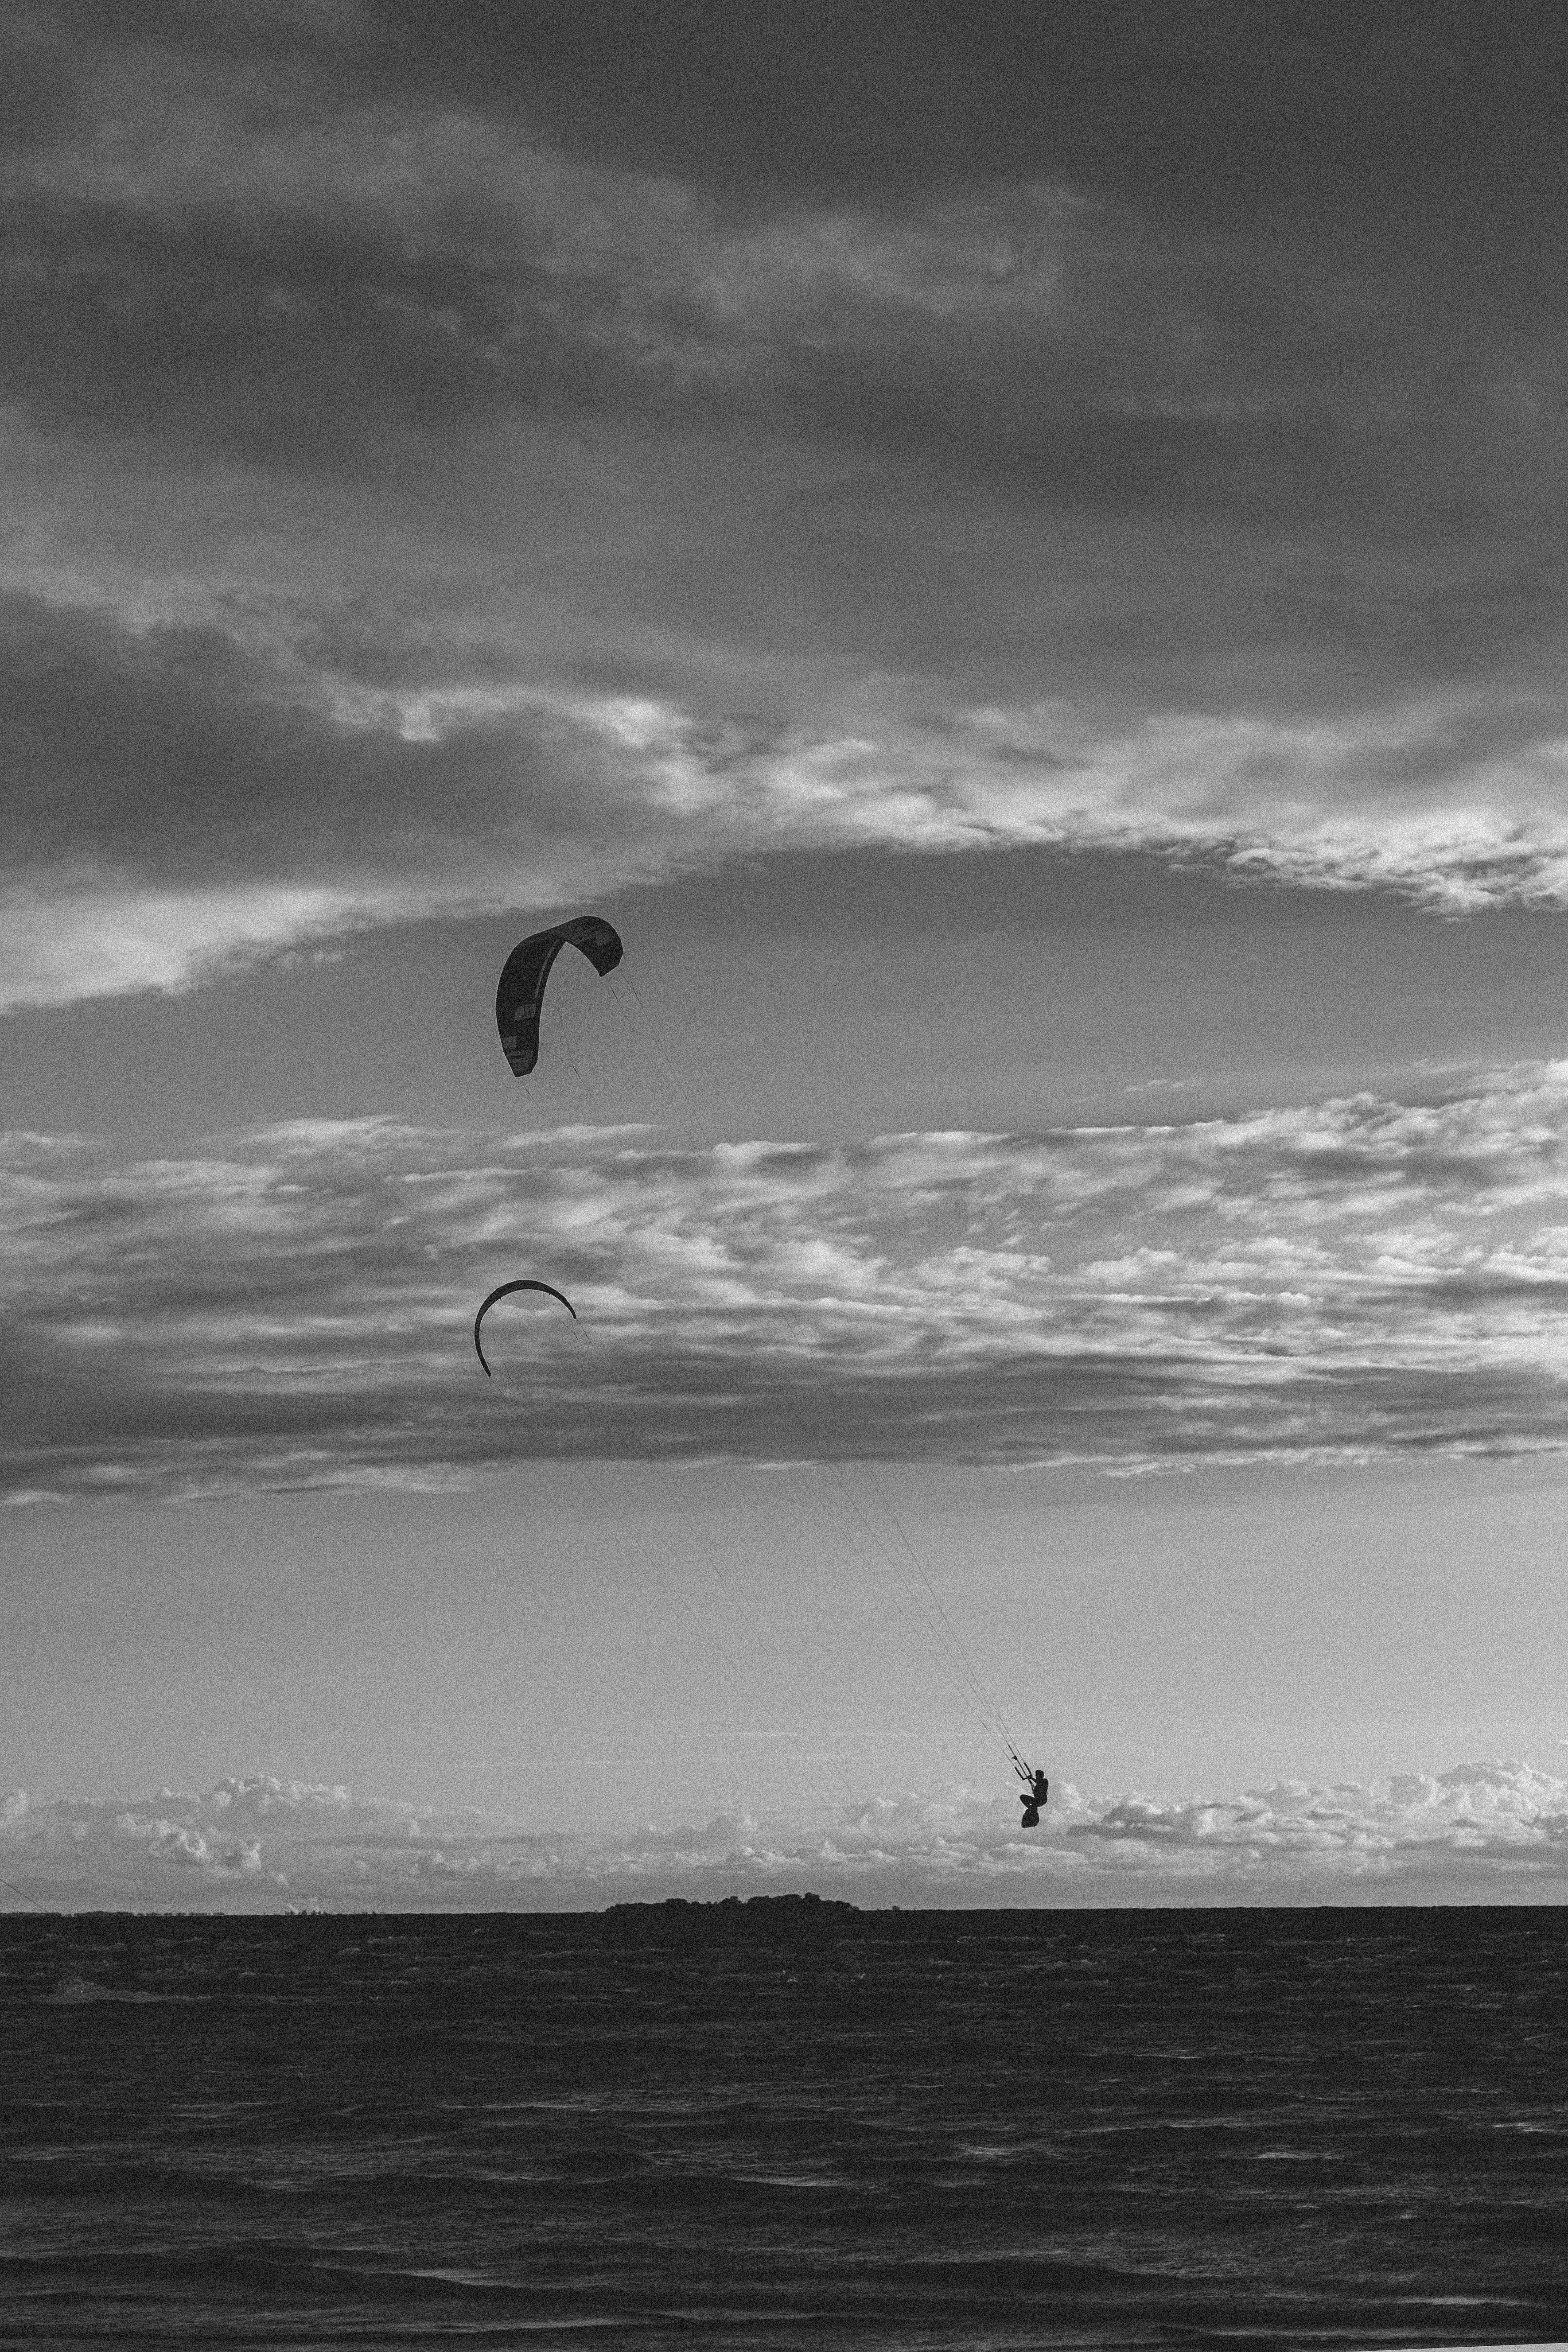 Kite Surf flying Wallpaper for iPhone 11, Pro Max, X, 8, 7, 6 - Free  Download on 3Wallpapers